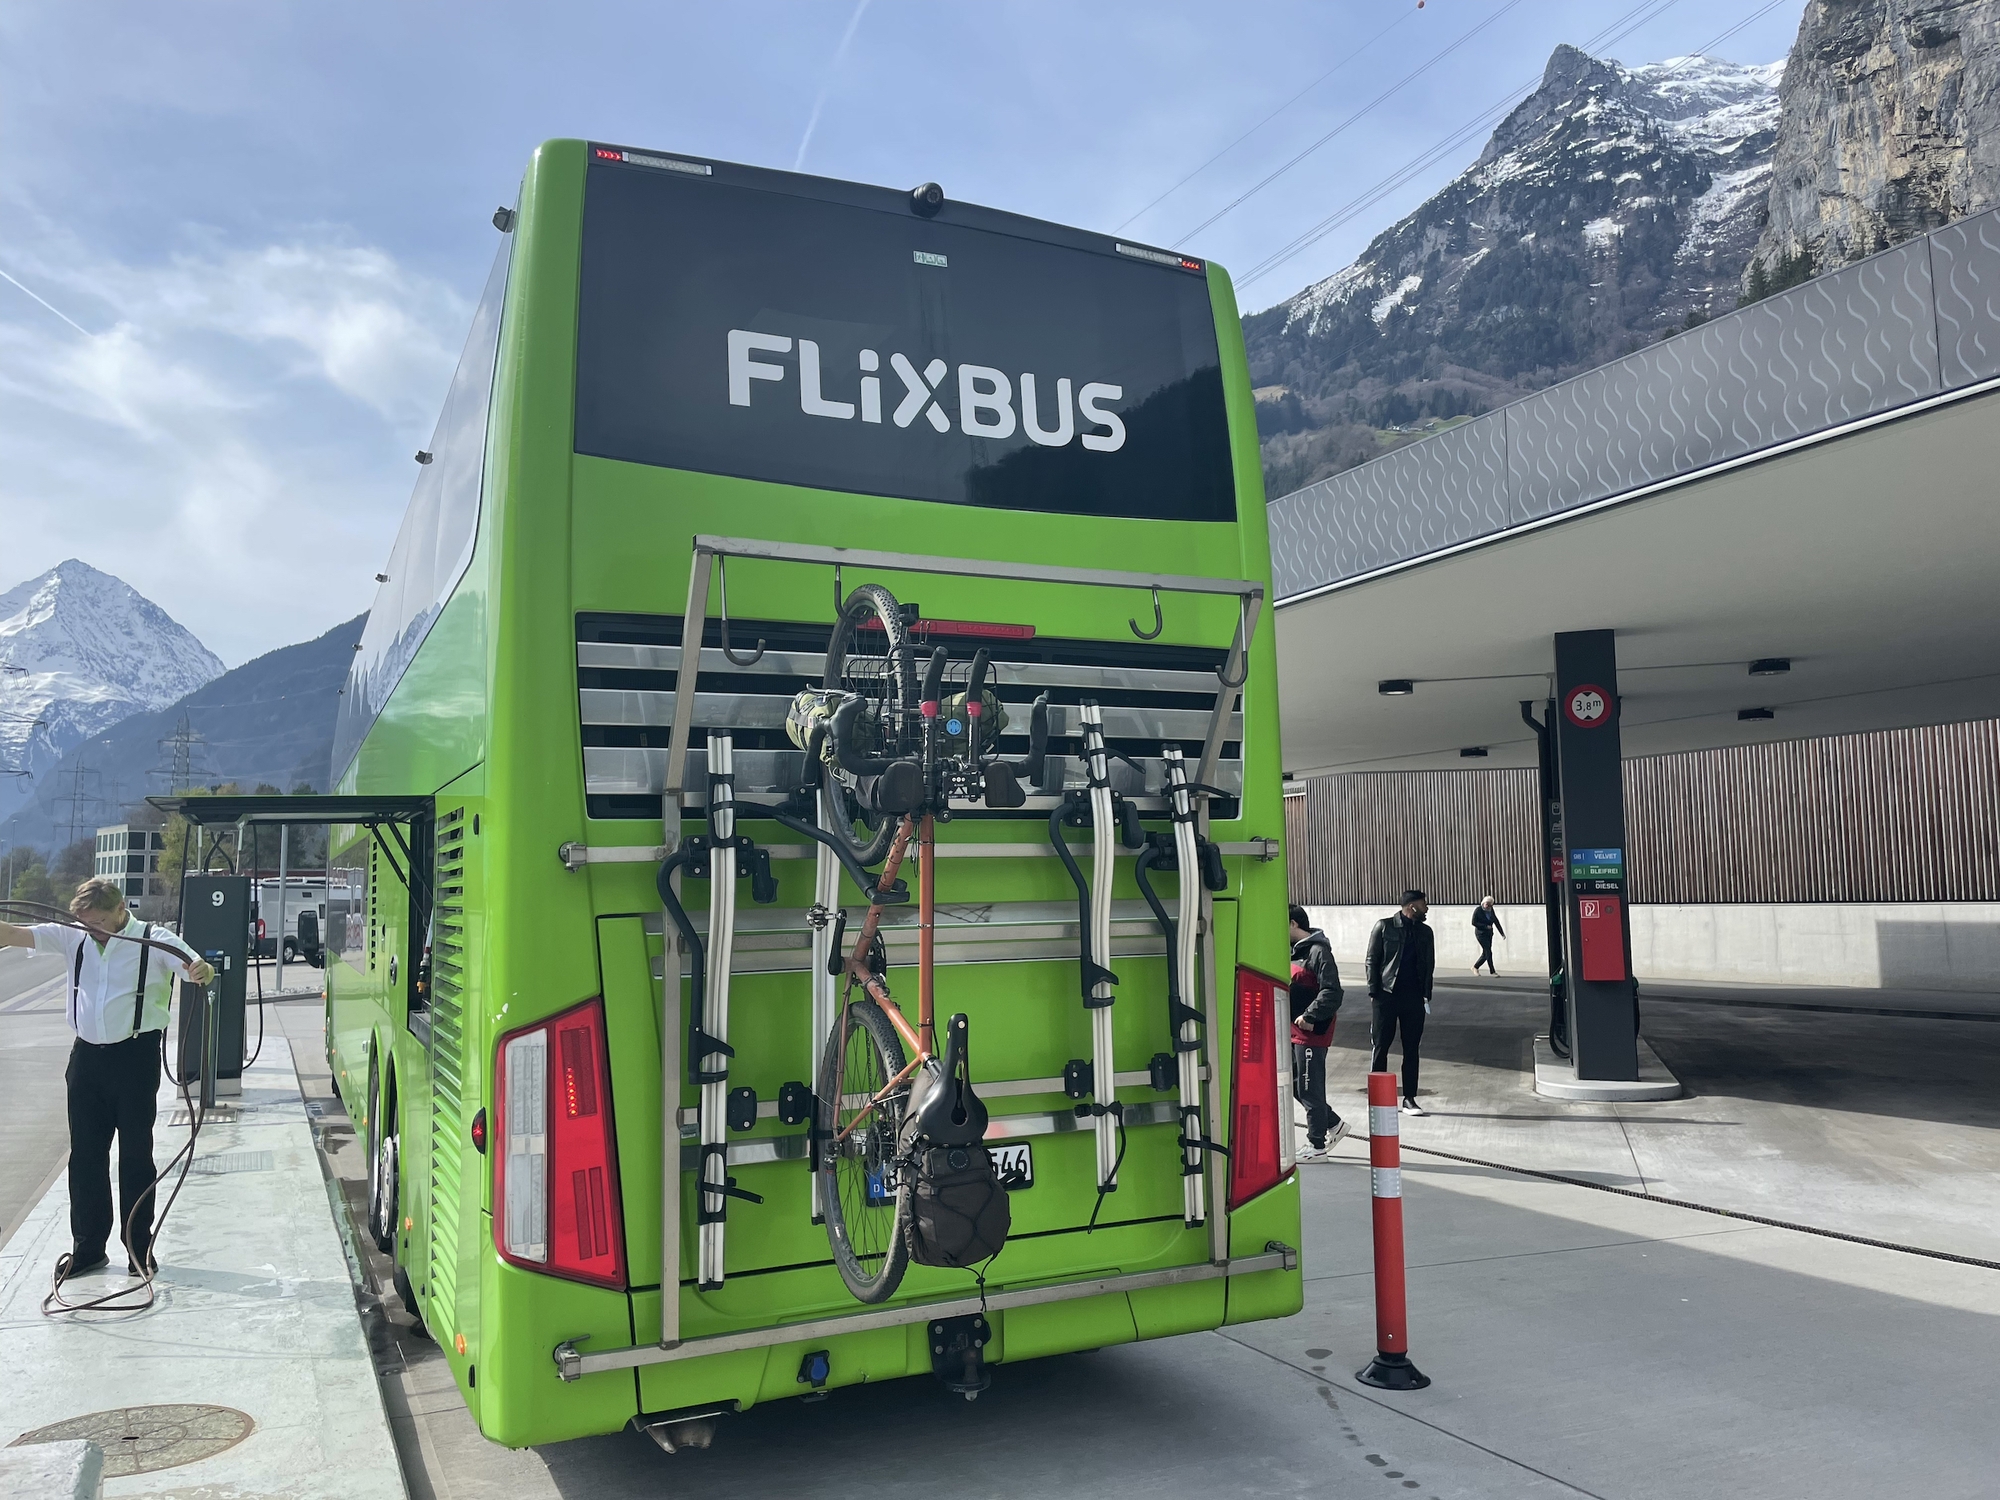 Big green Flixbus coach amongst the Alps. My bicycle on the back securely attached to a rack.